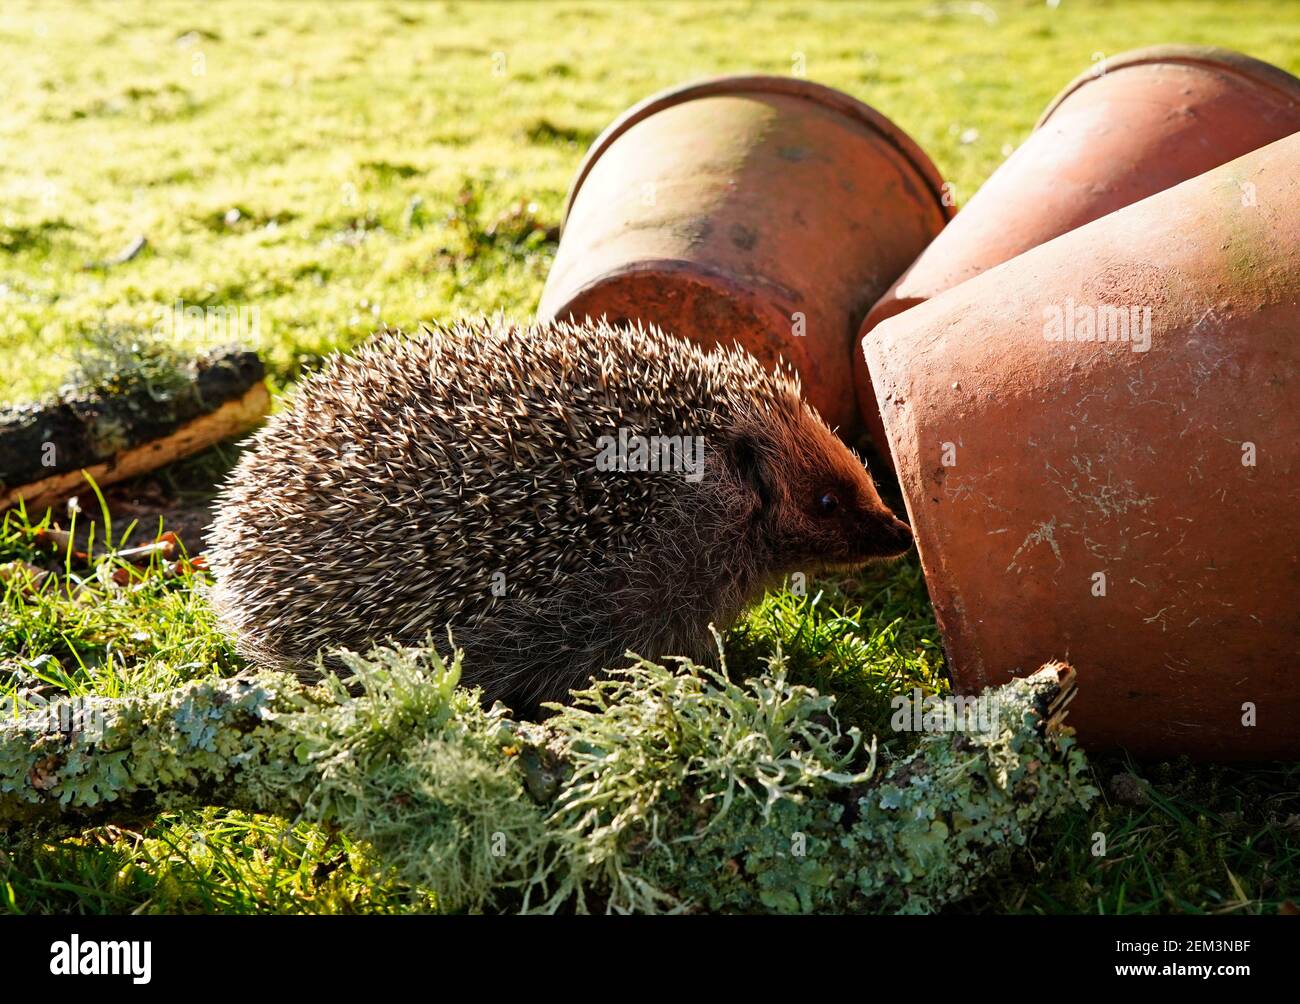 The great British Hedgehog another species in decline Stock Photo